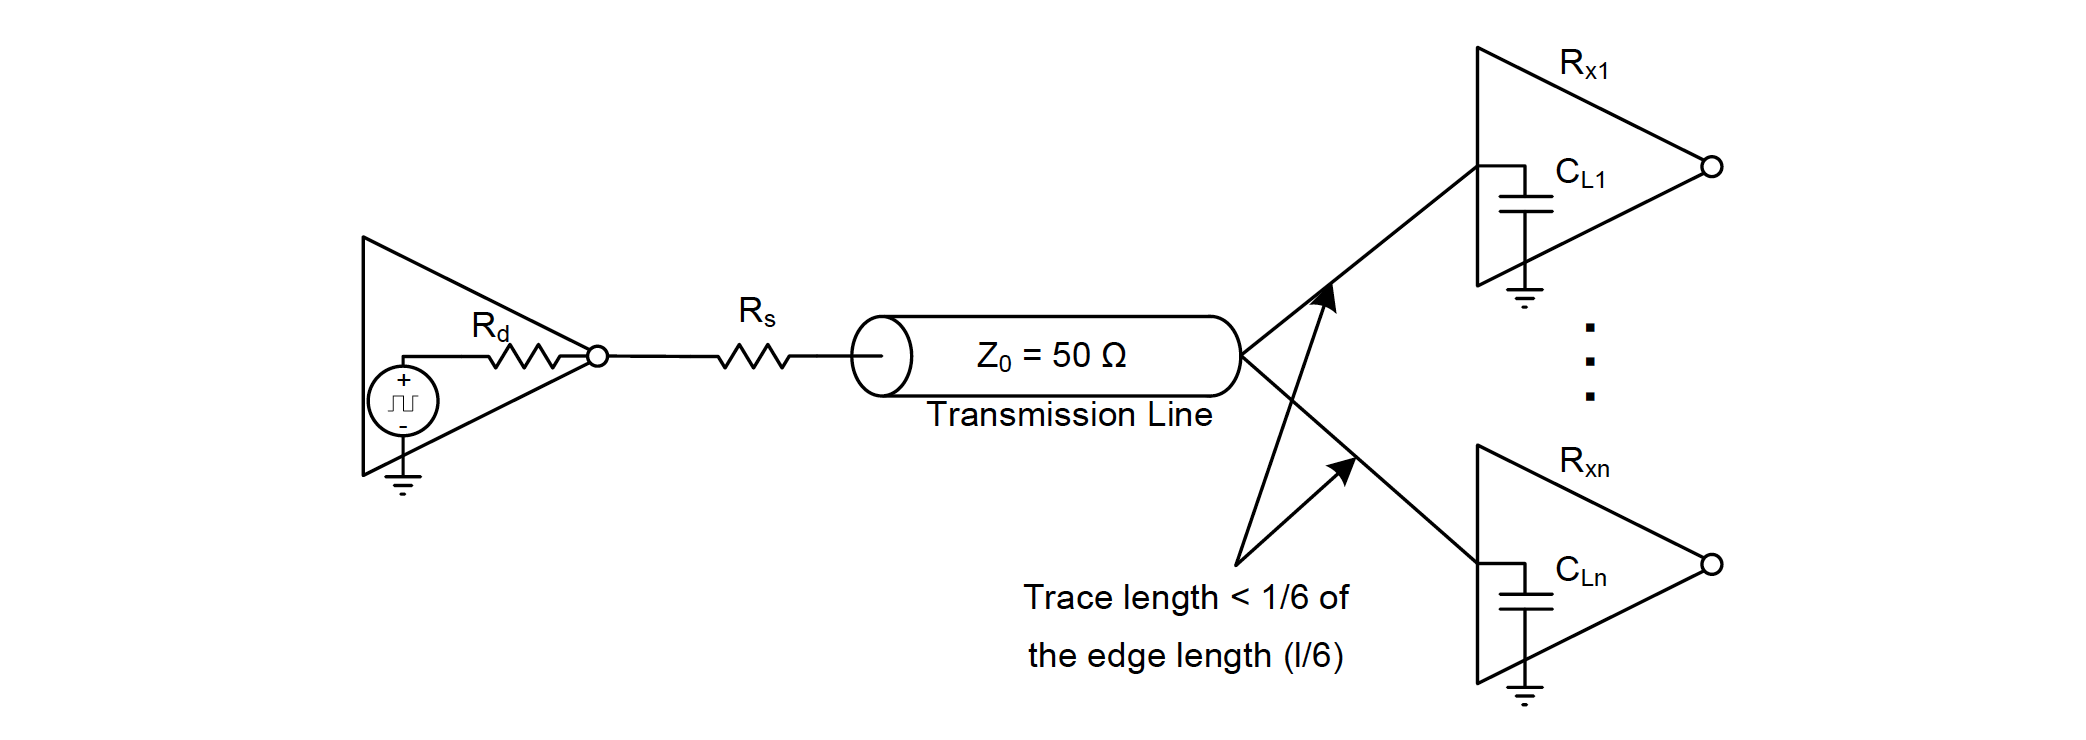 Series Termination with Multiple Loads Lumped at End of Trace